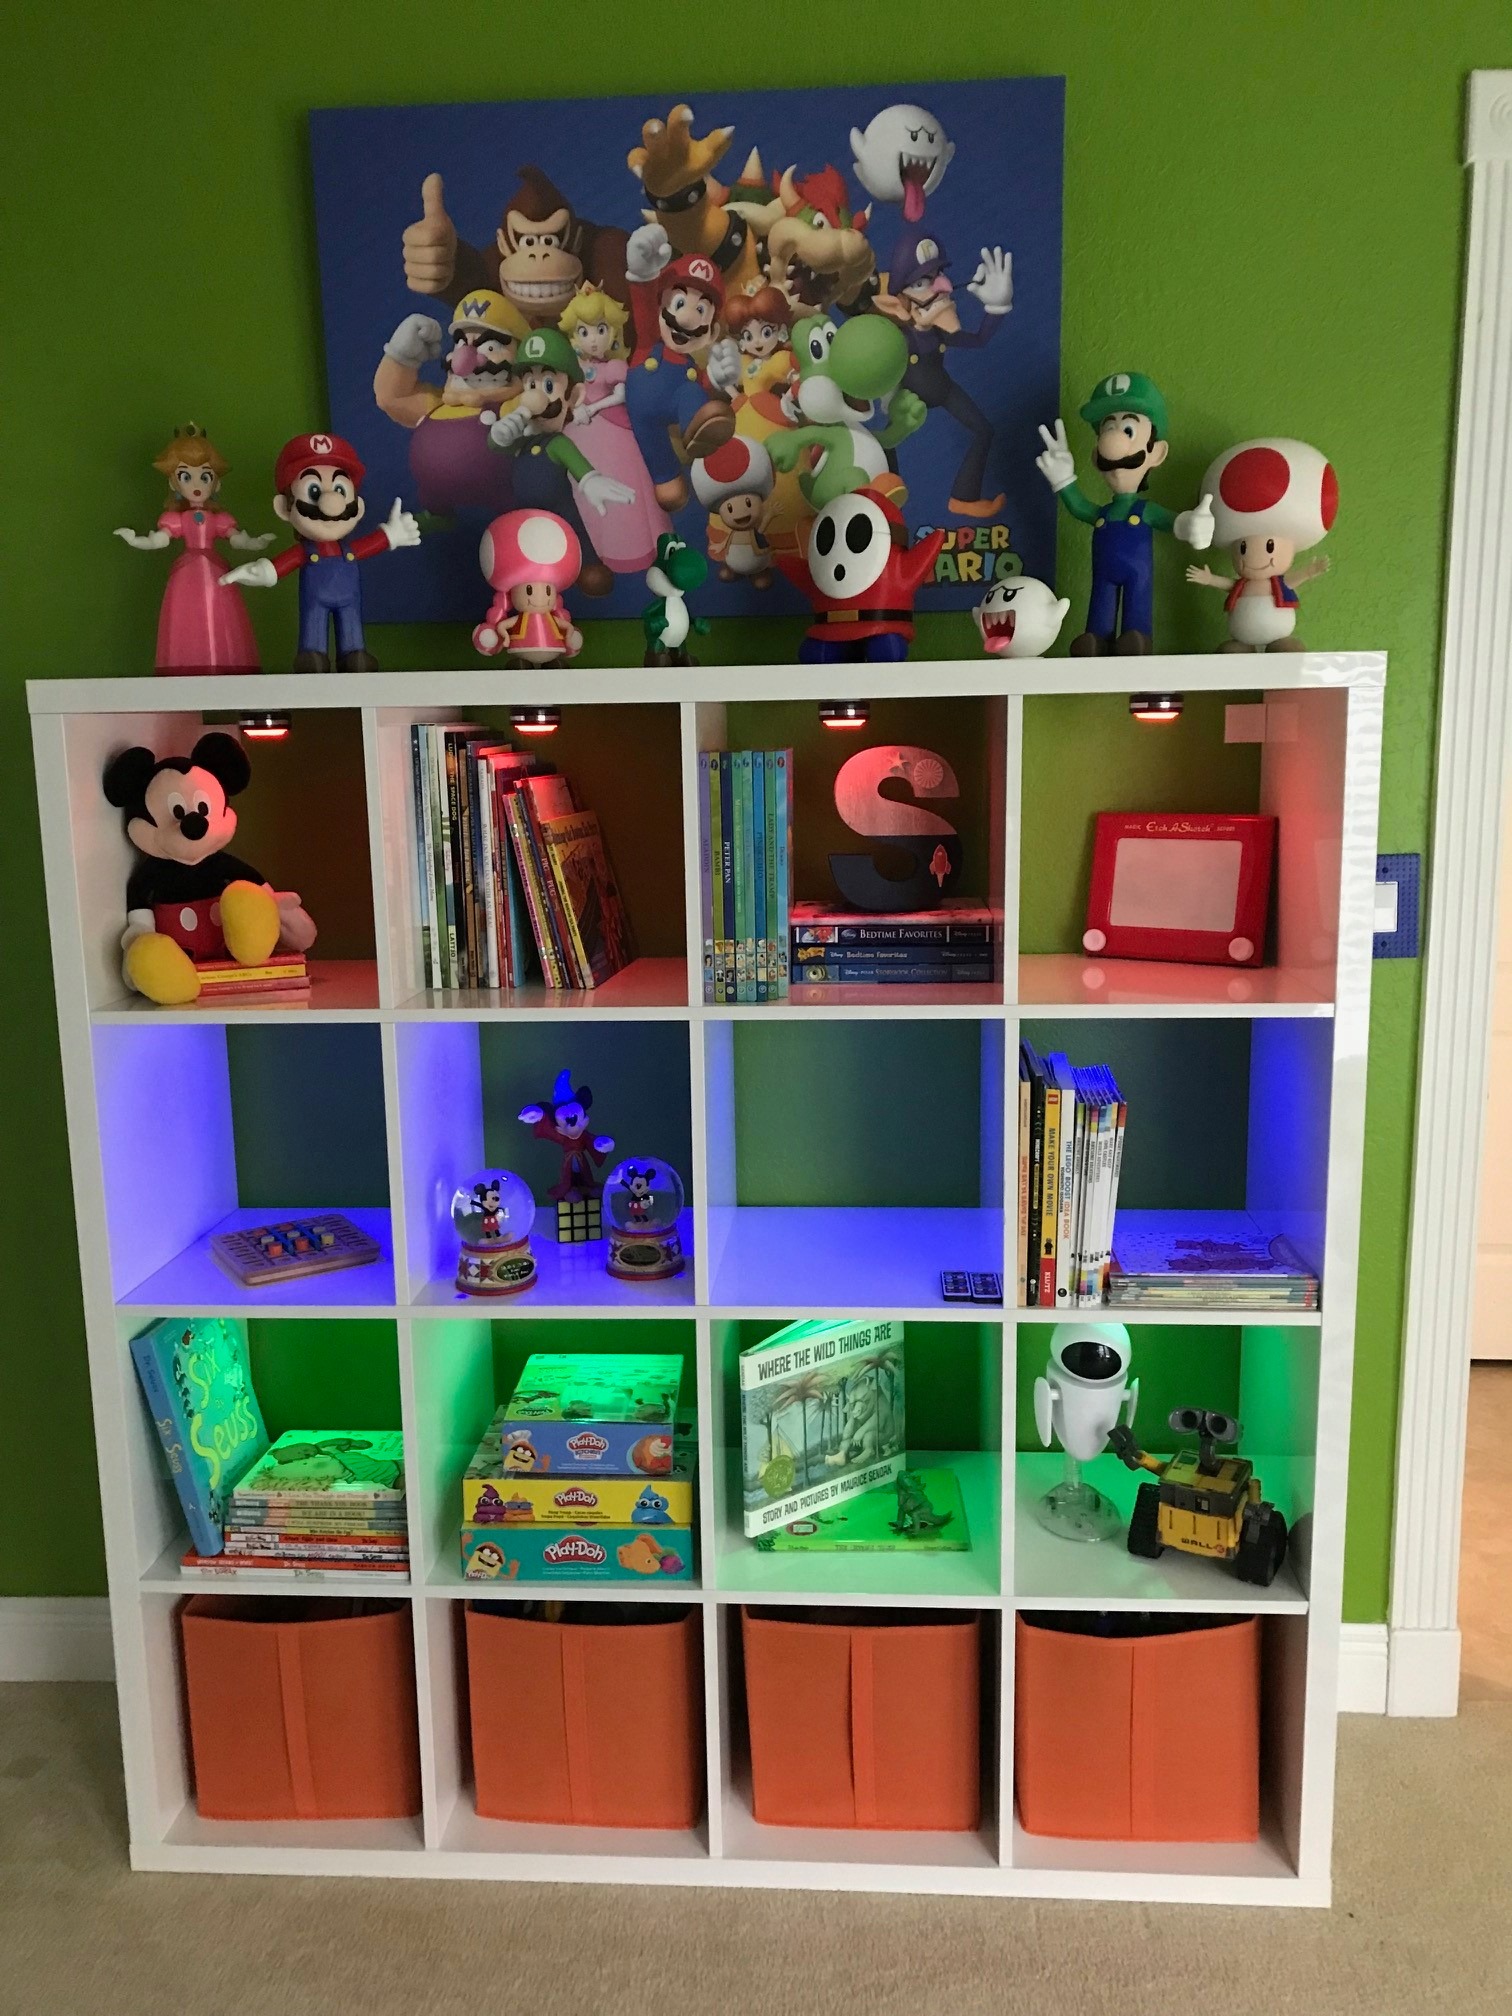 This is a fun way to organize your child's room